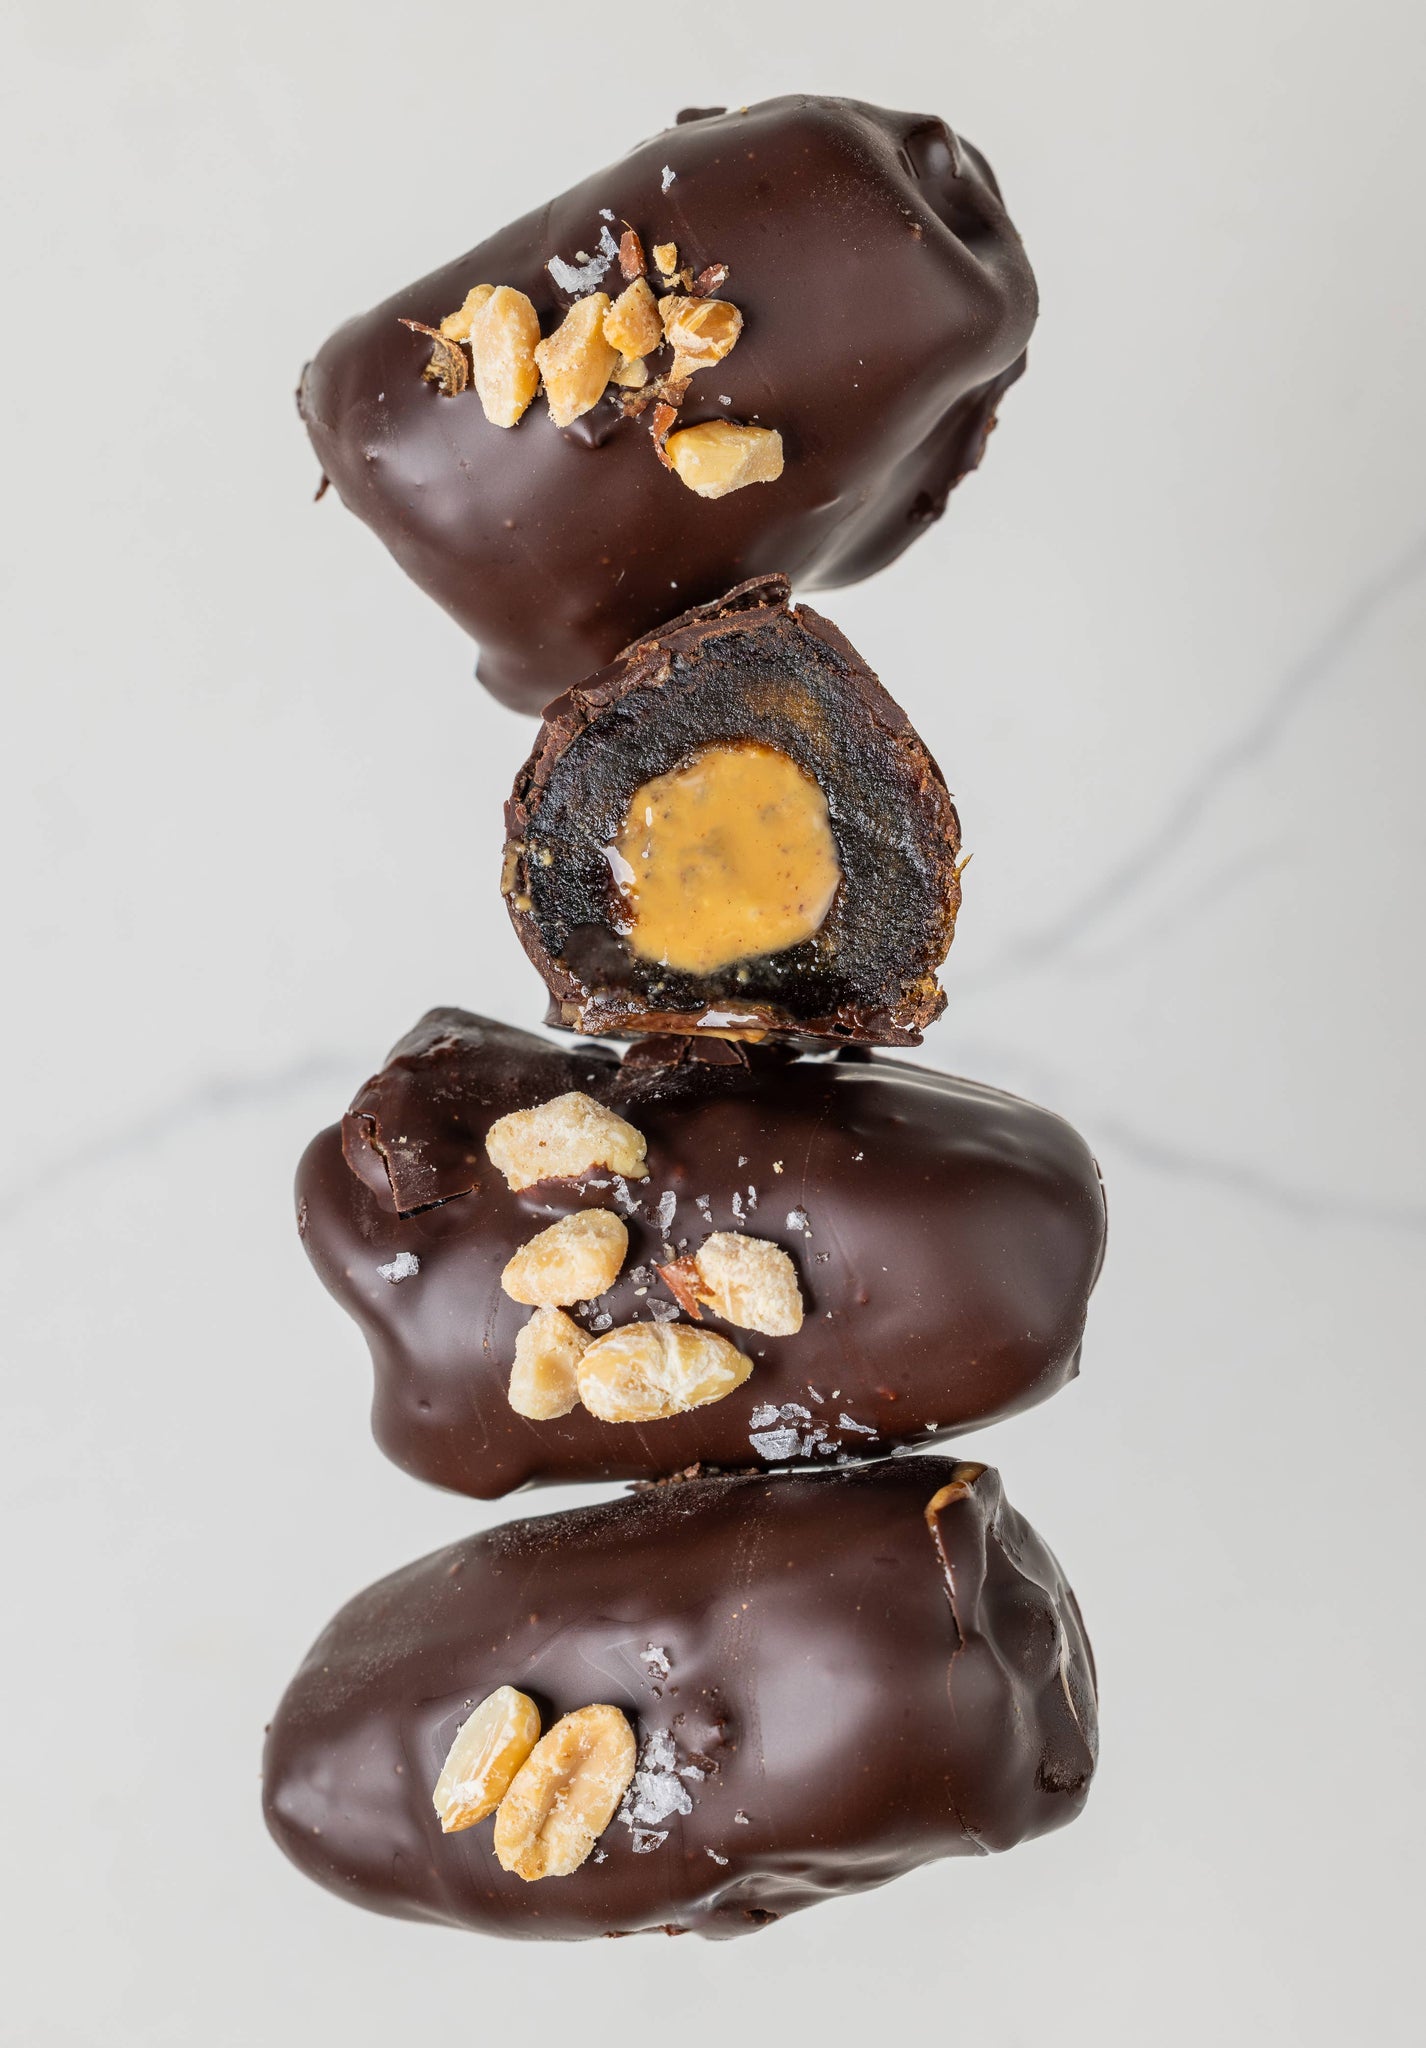 Peanut Butter Crunch- chocolate covered dates